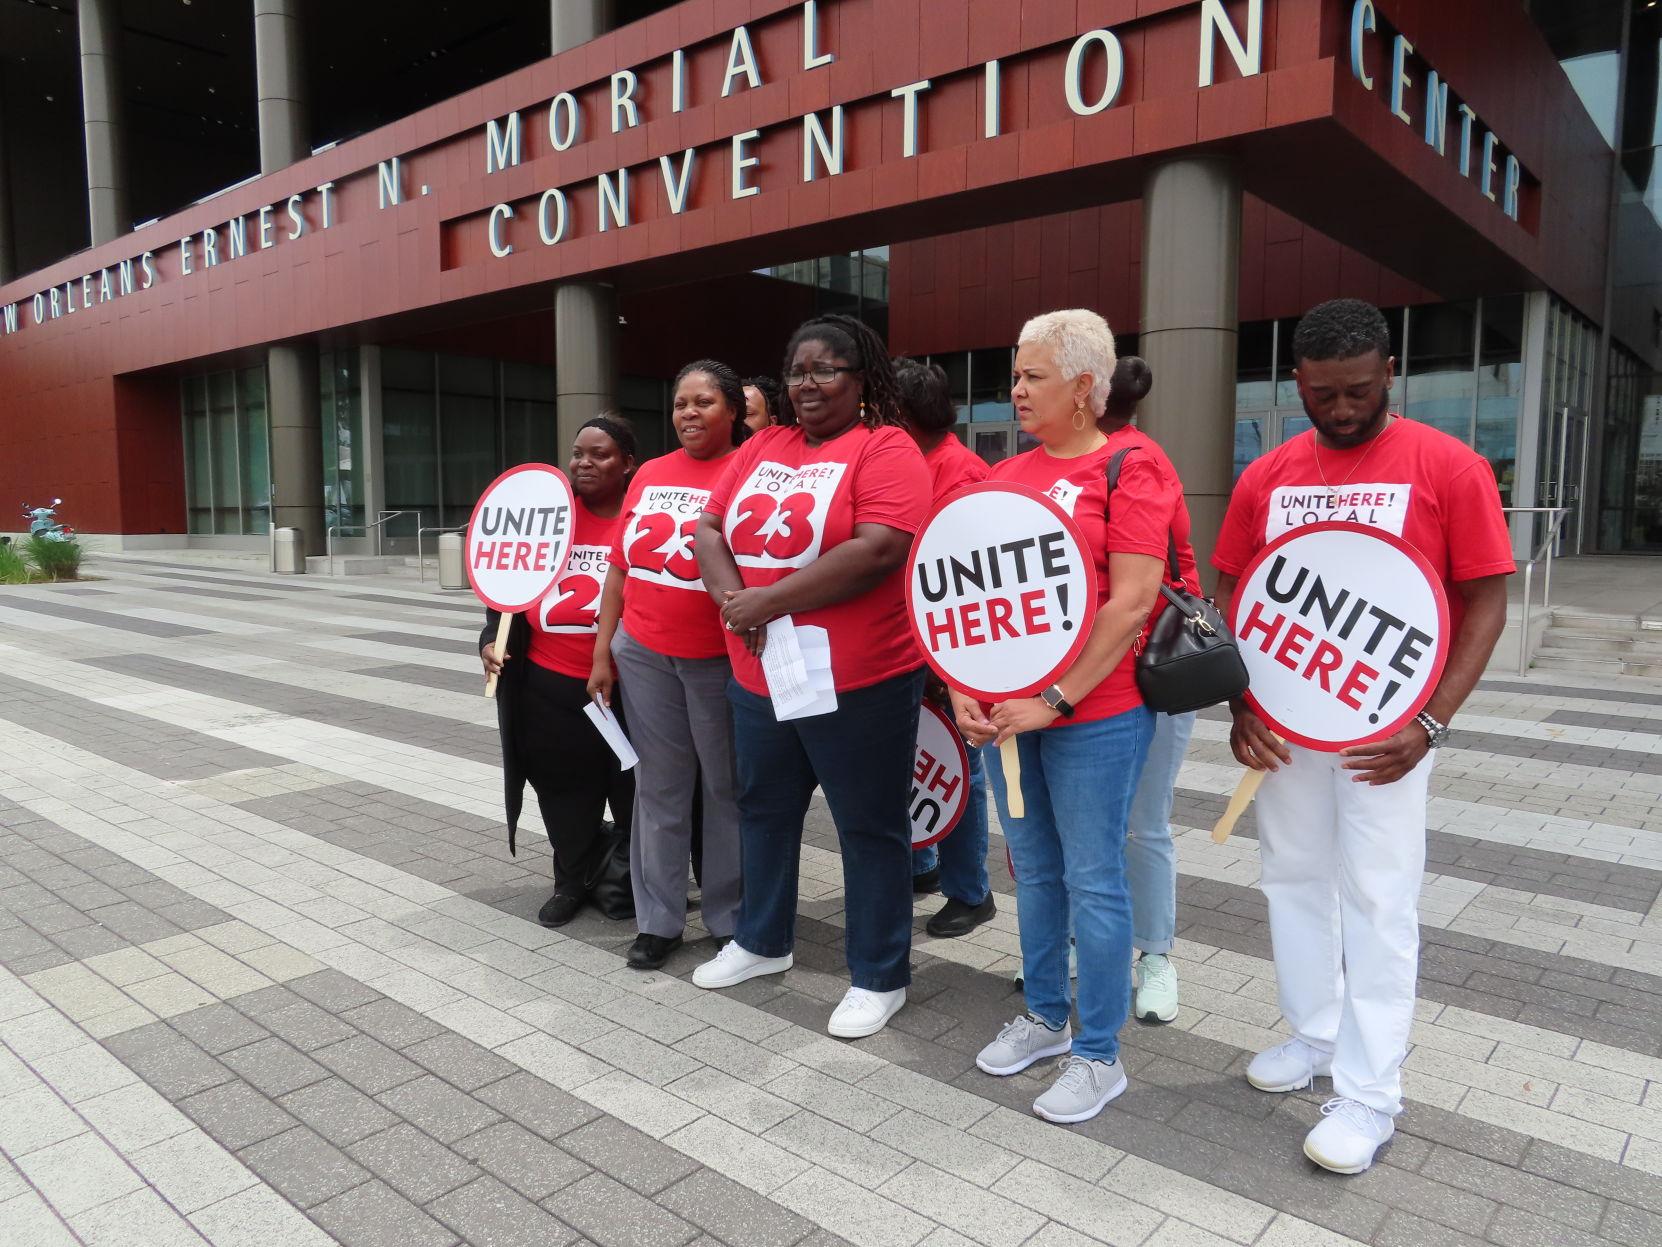 $1M donated by New Orleans' convention center -- but labor activists call for much more